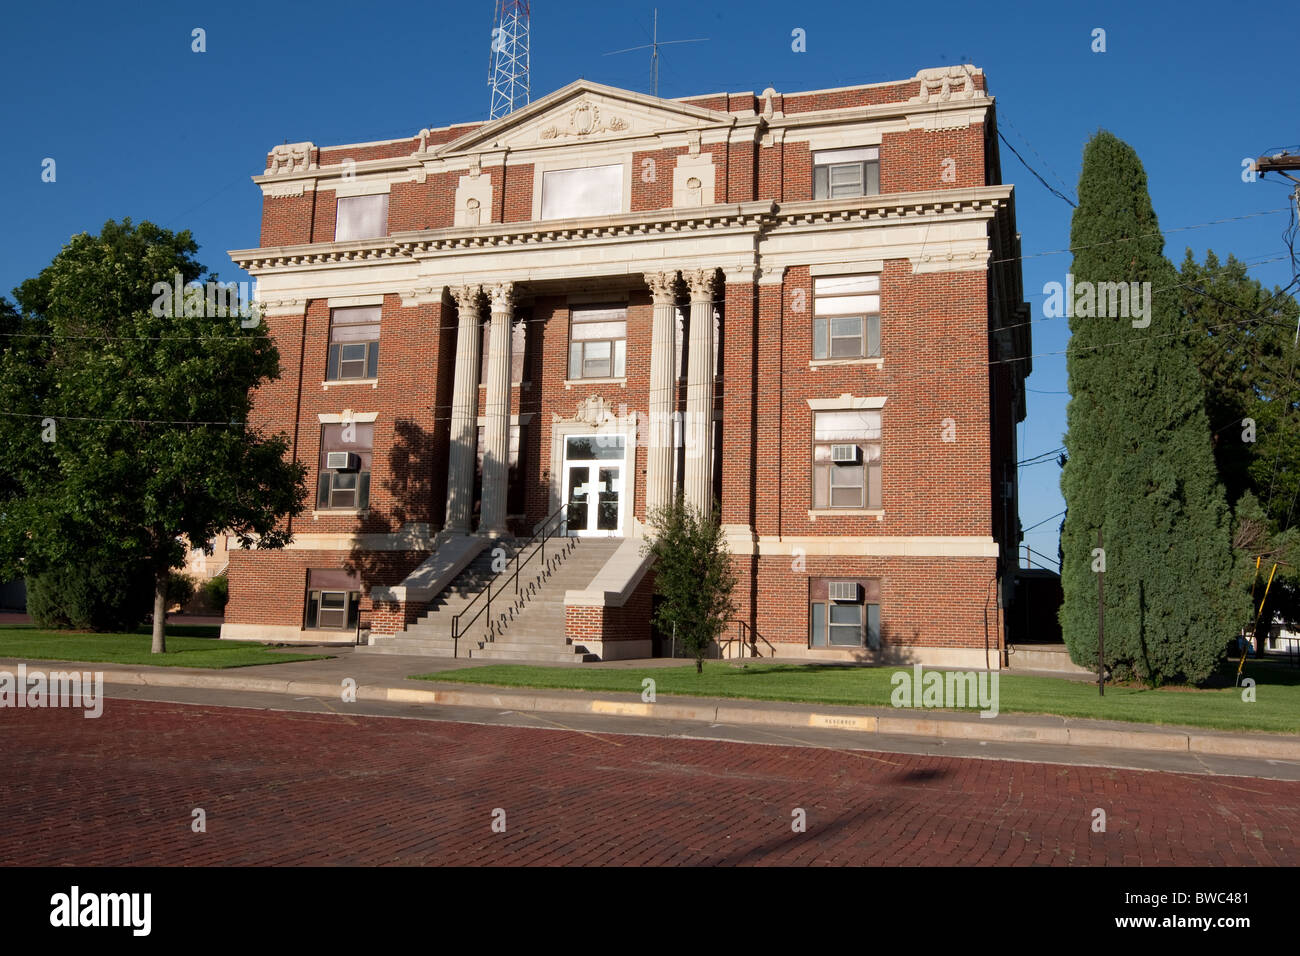 Hall County Courthouse in Memphis, Texas, a Classical Revival style with Beaux Arts influences, built in 1923. Stock Photo